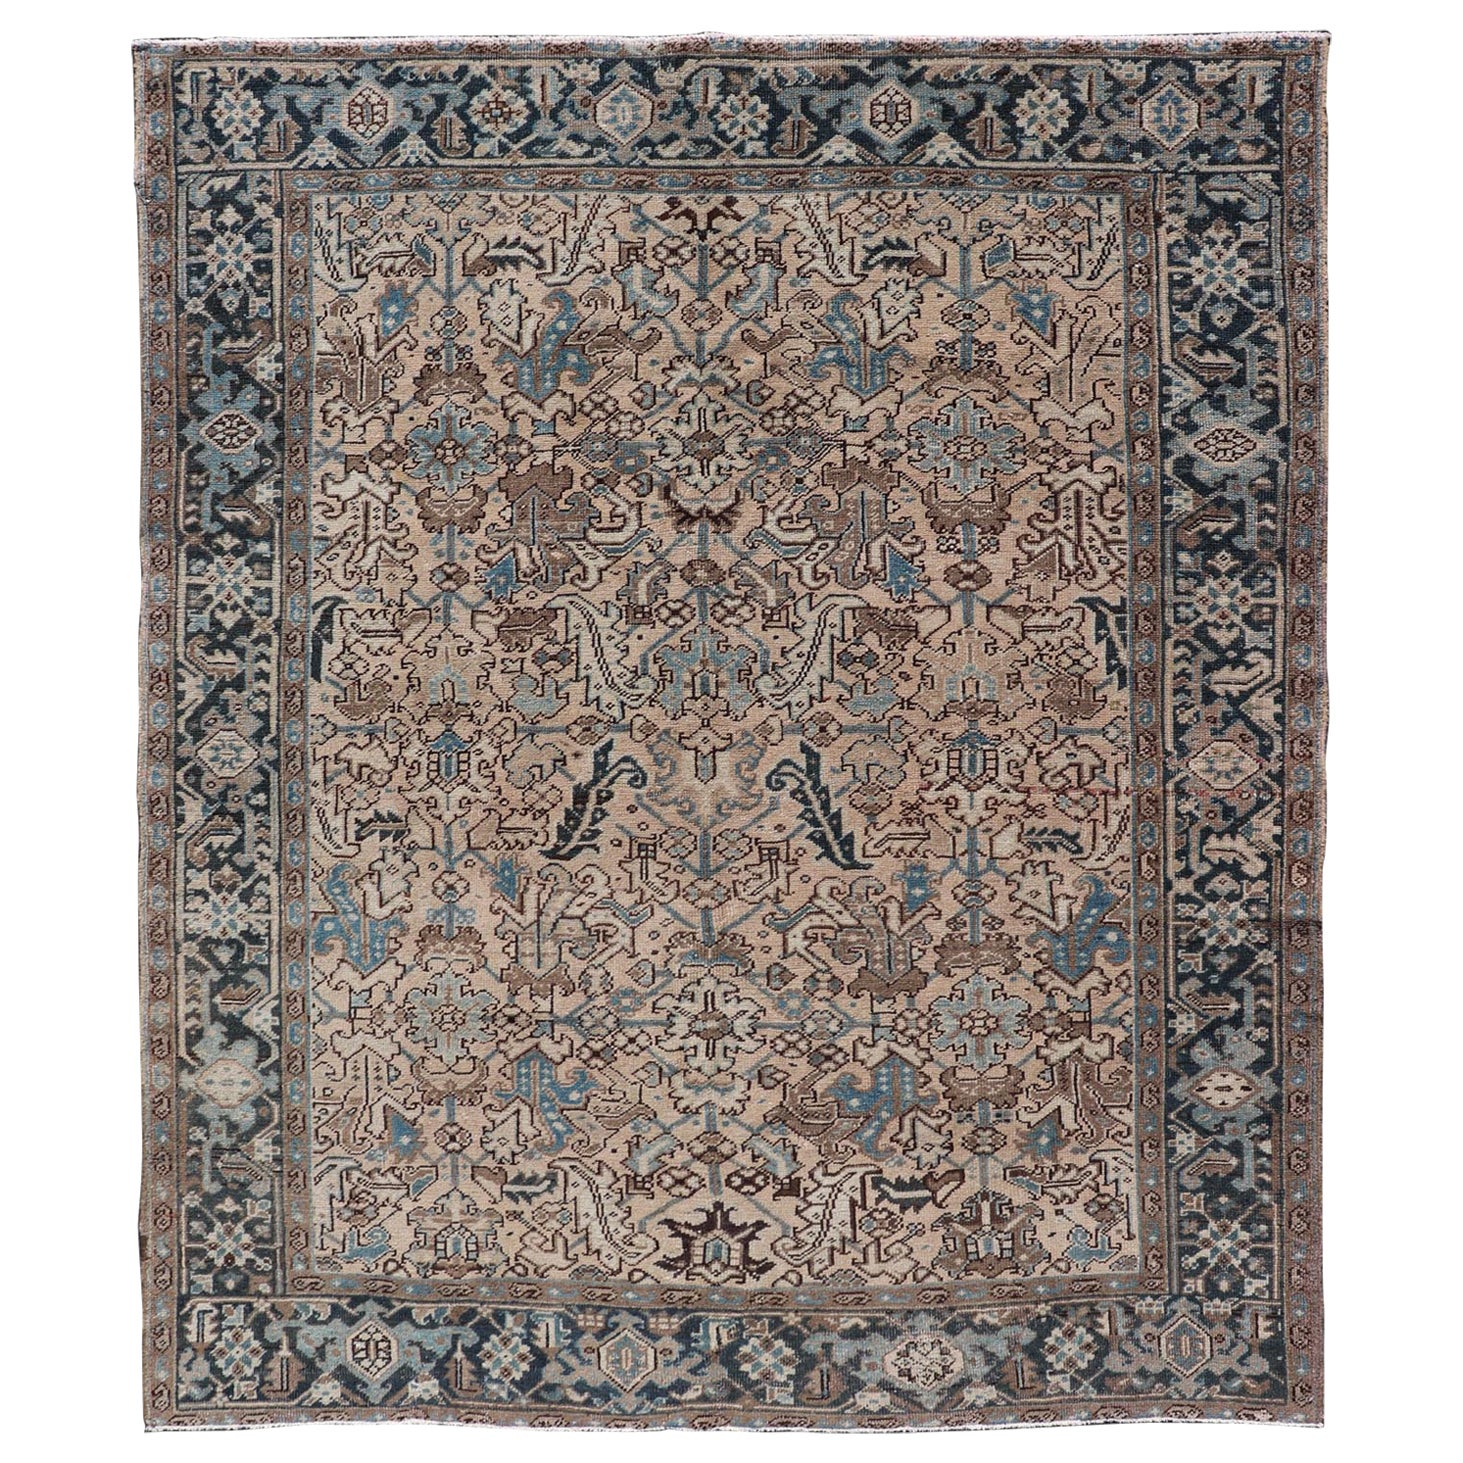 Square Size Persian Heriz Rug with All-Over Sub Floral Design in Brown & Blue